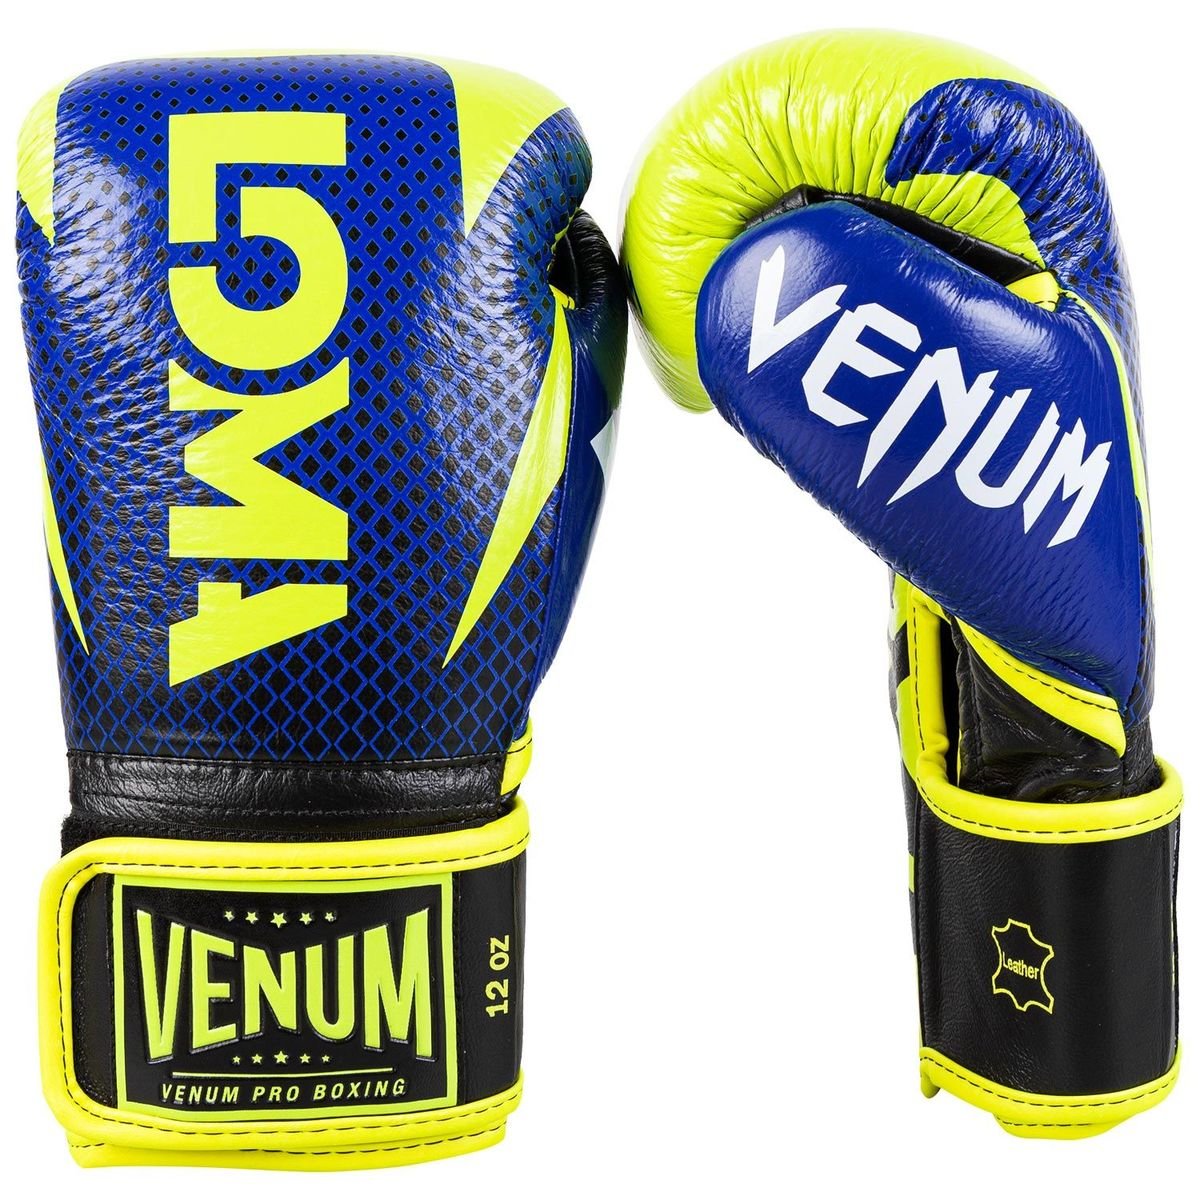 VENUM-03912-405 HAMMER THAI GLOVES EDITION MUAY AAGsport VELCRO LOMA PRO BOXING –